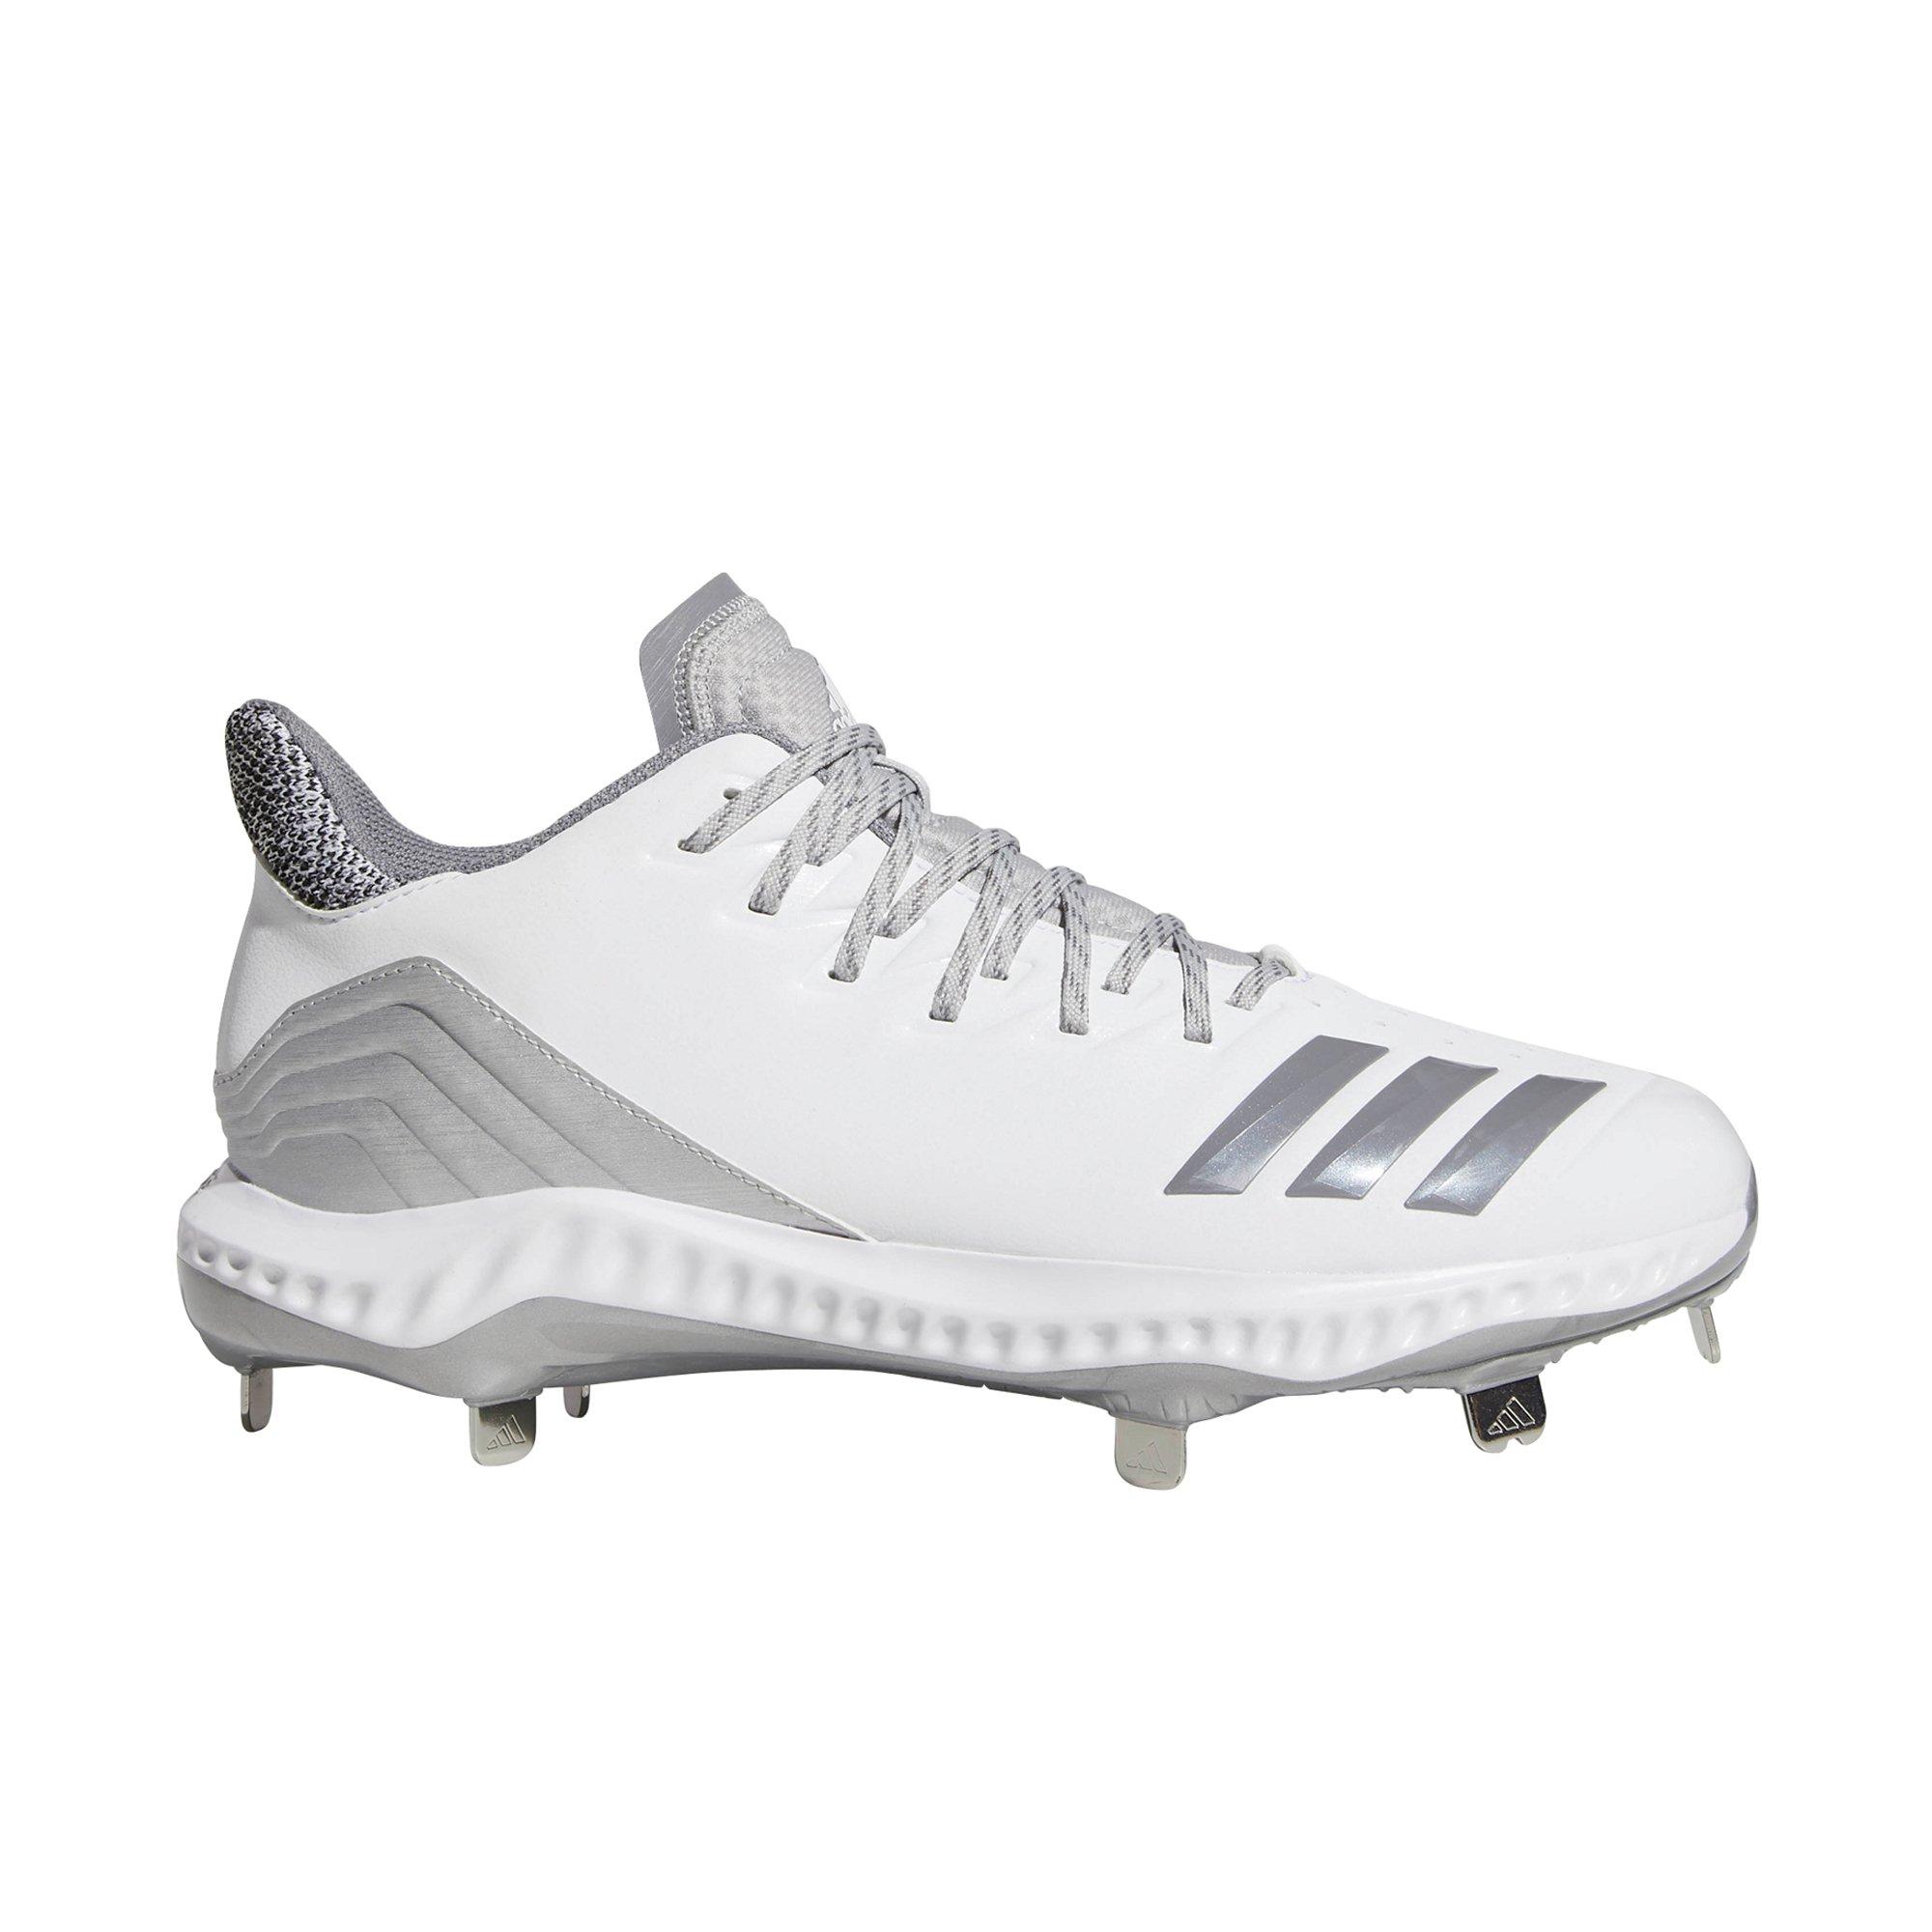 icon 4 cleats